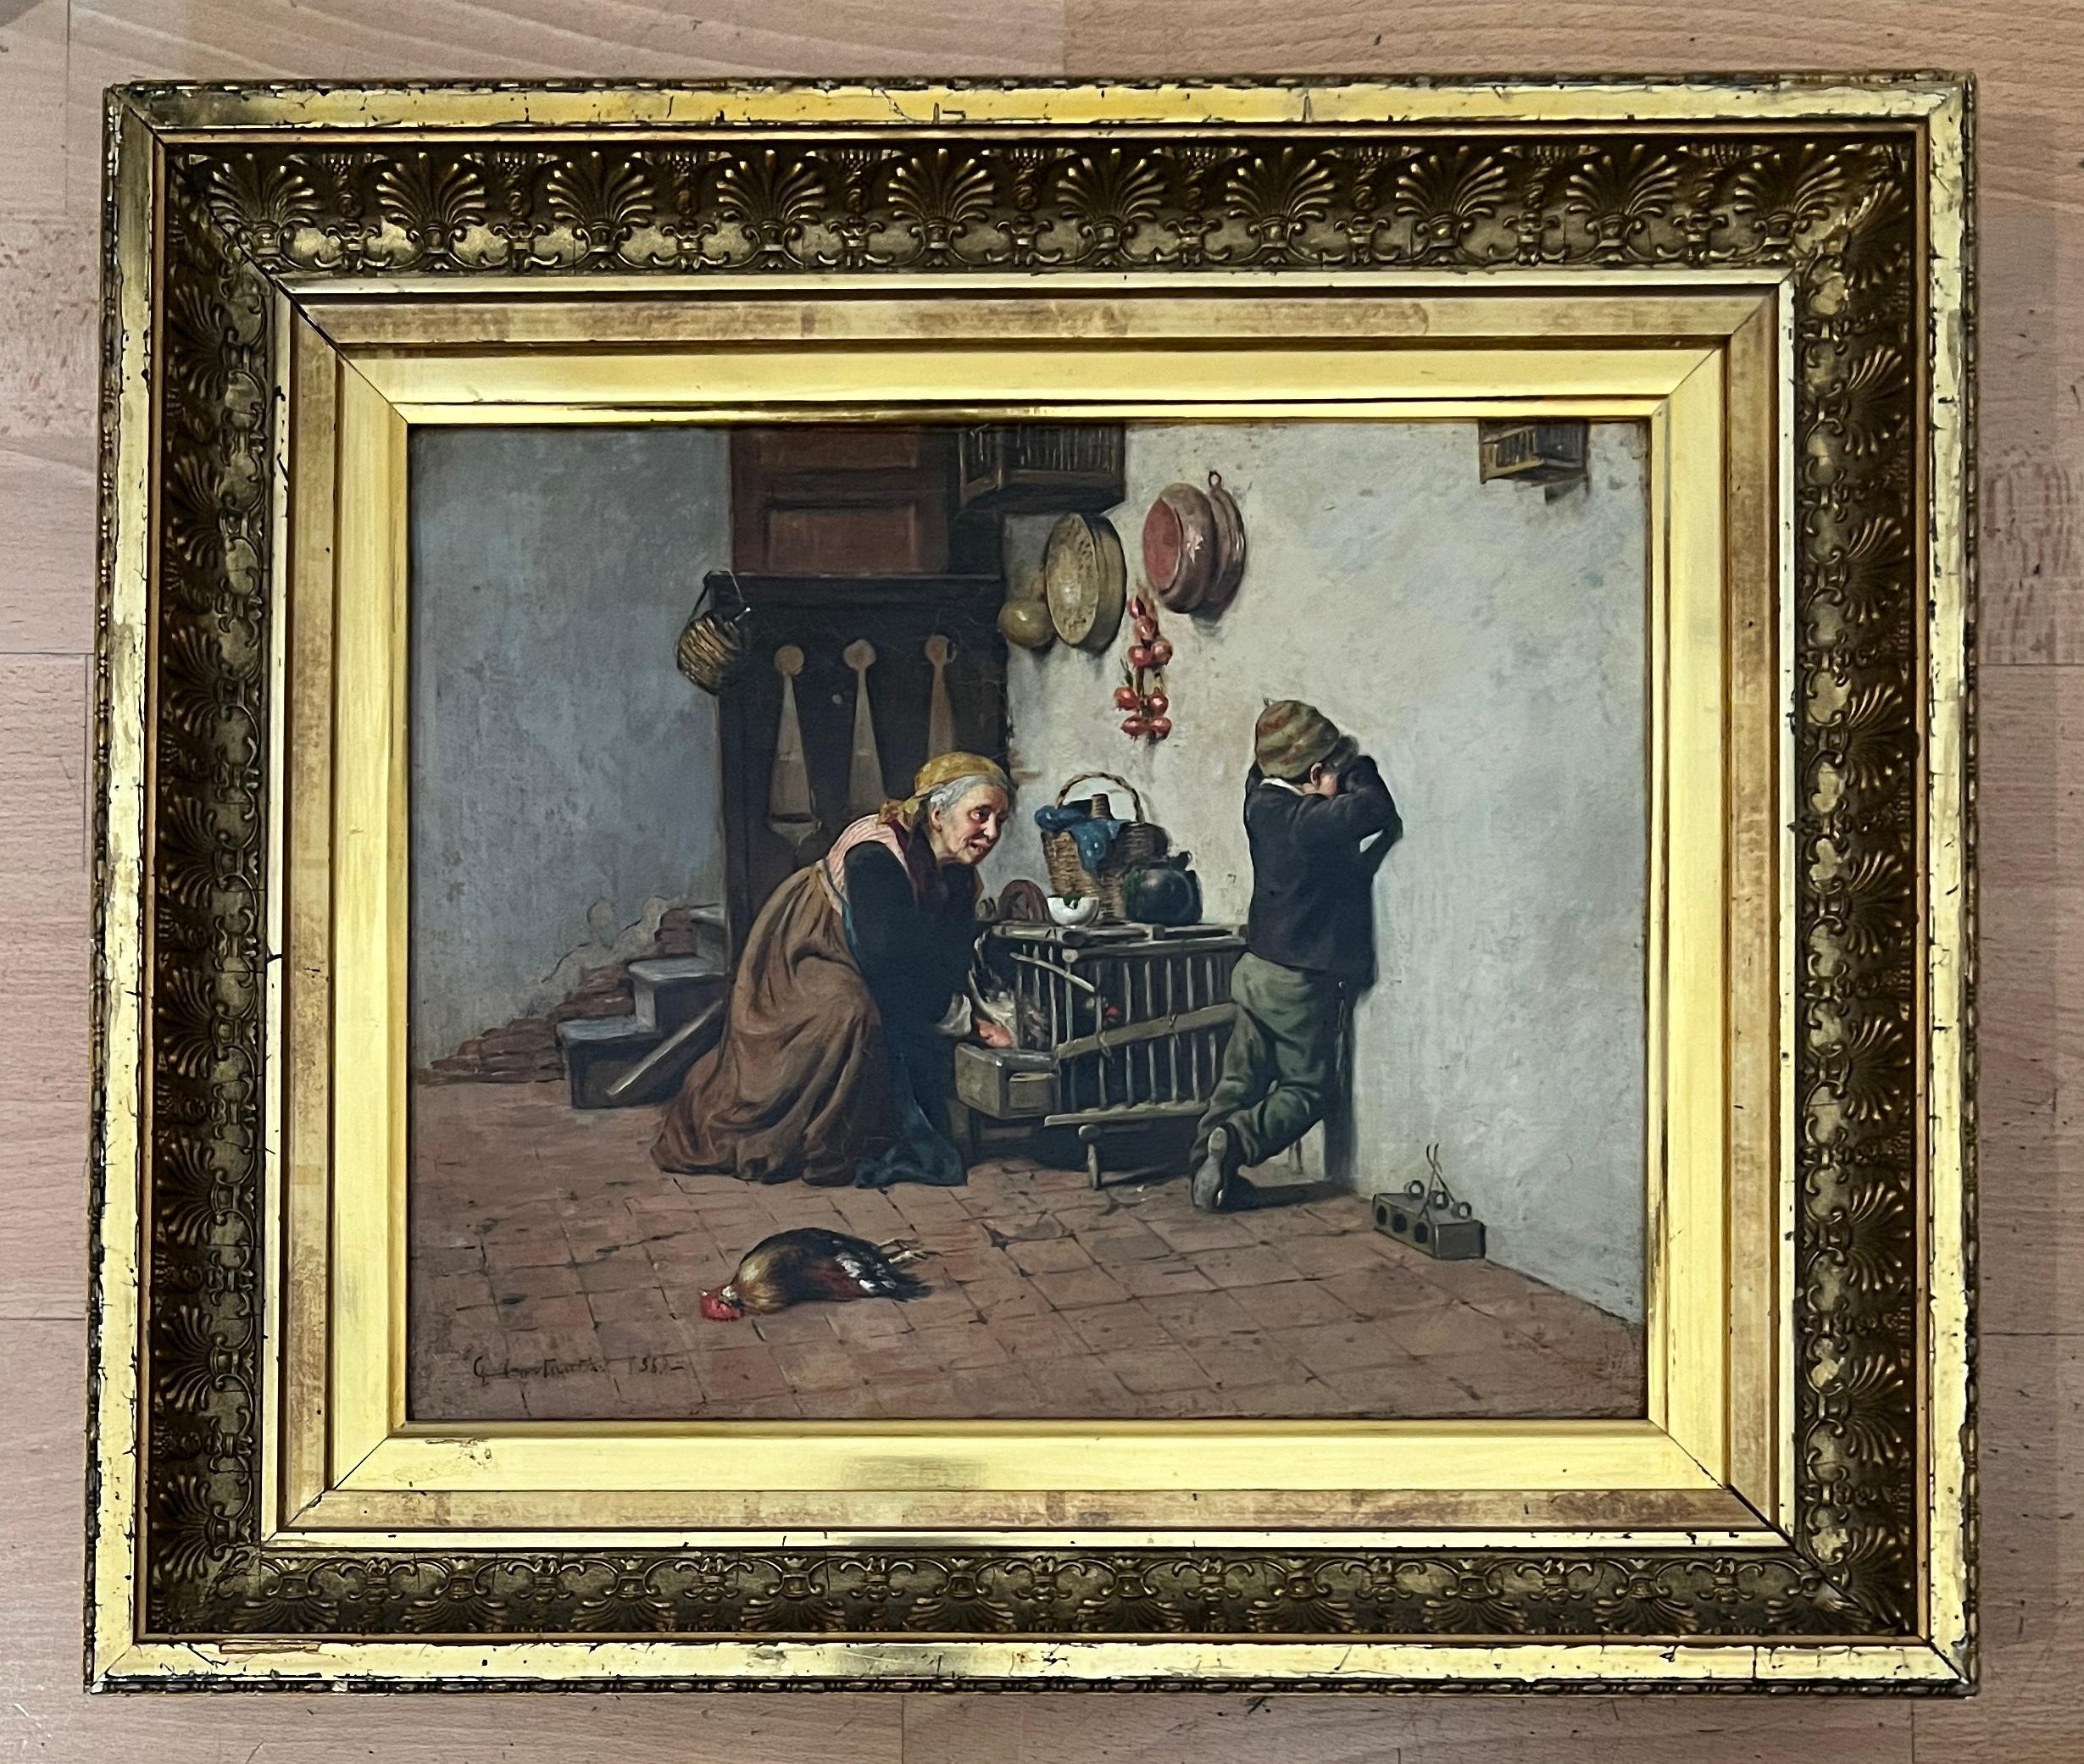 Preparation of the meal and punished child - Painting by Giuseppe Costantini